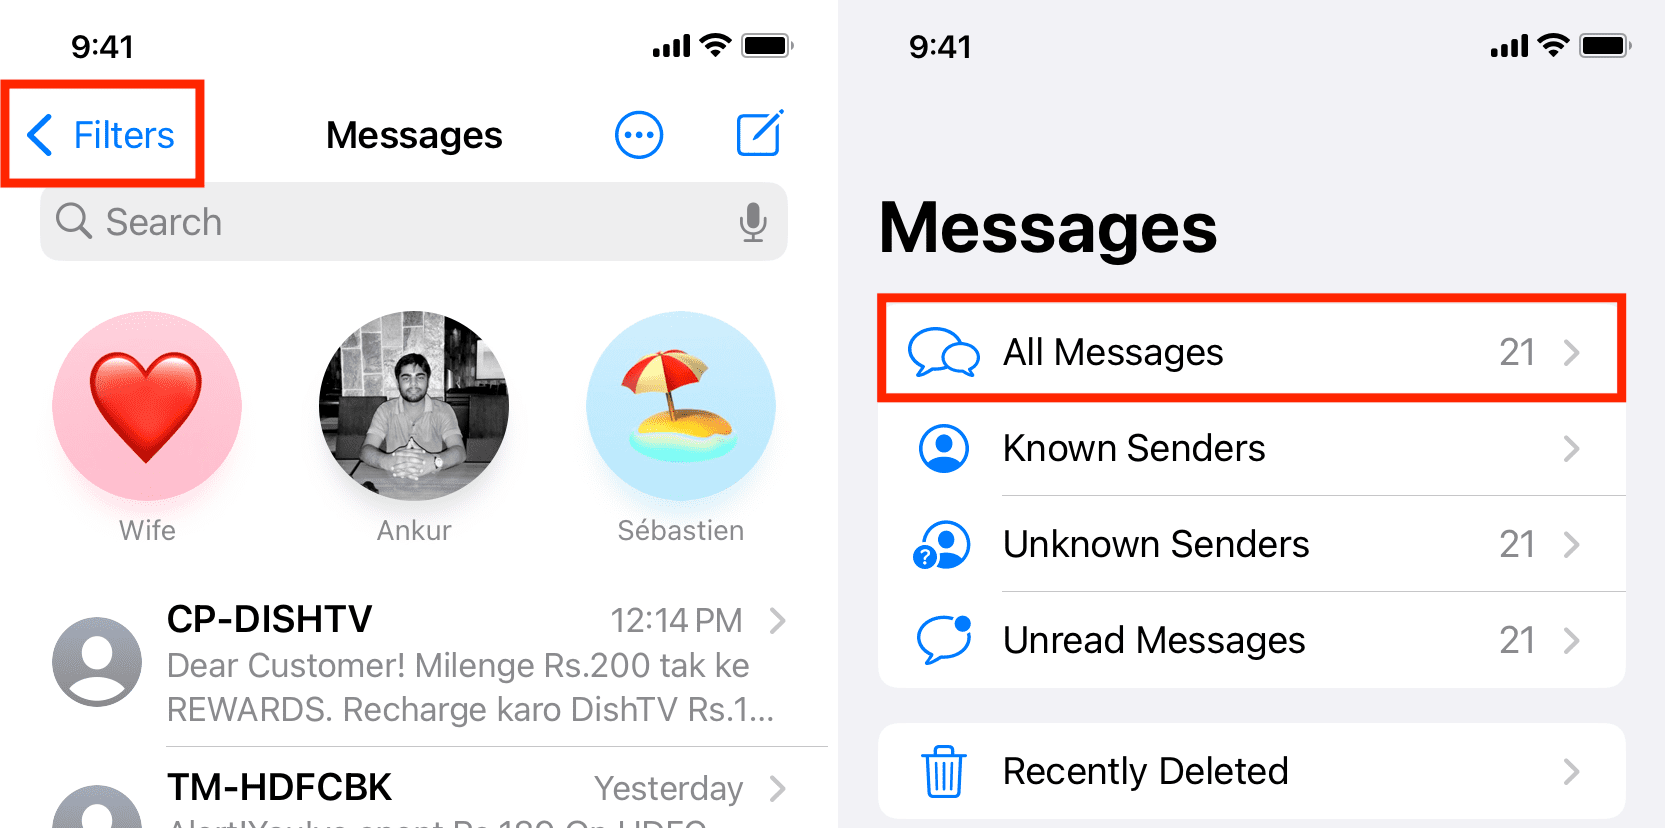 See all messages on iPhone without filters